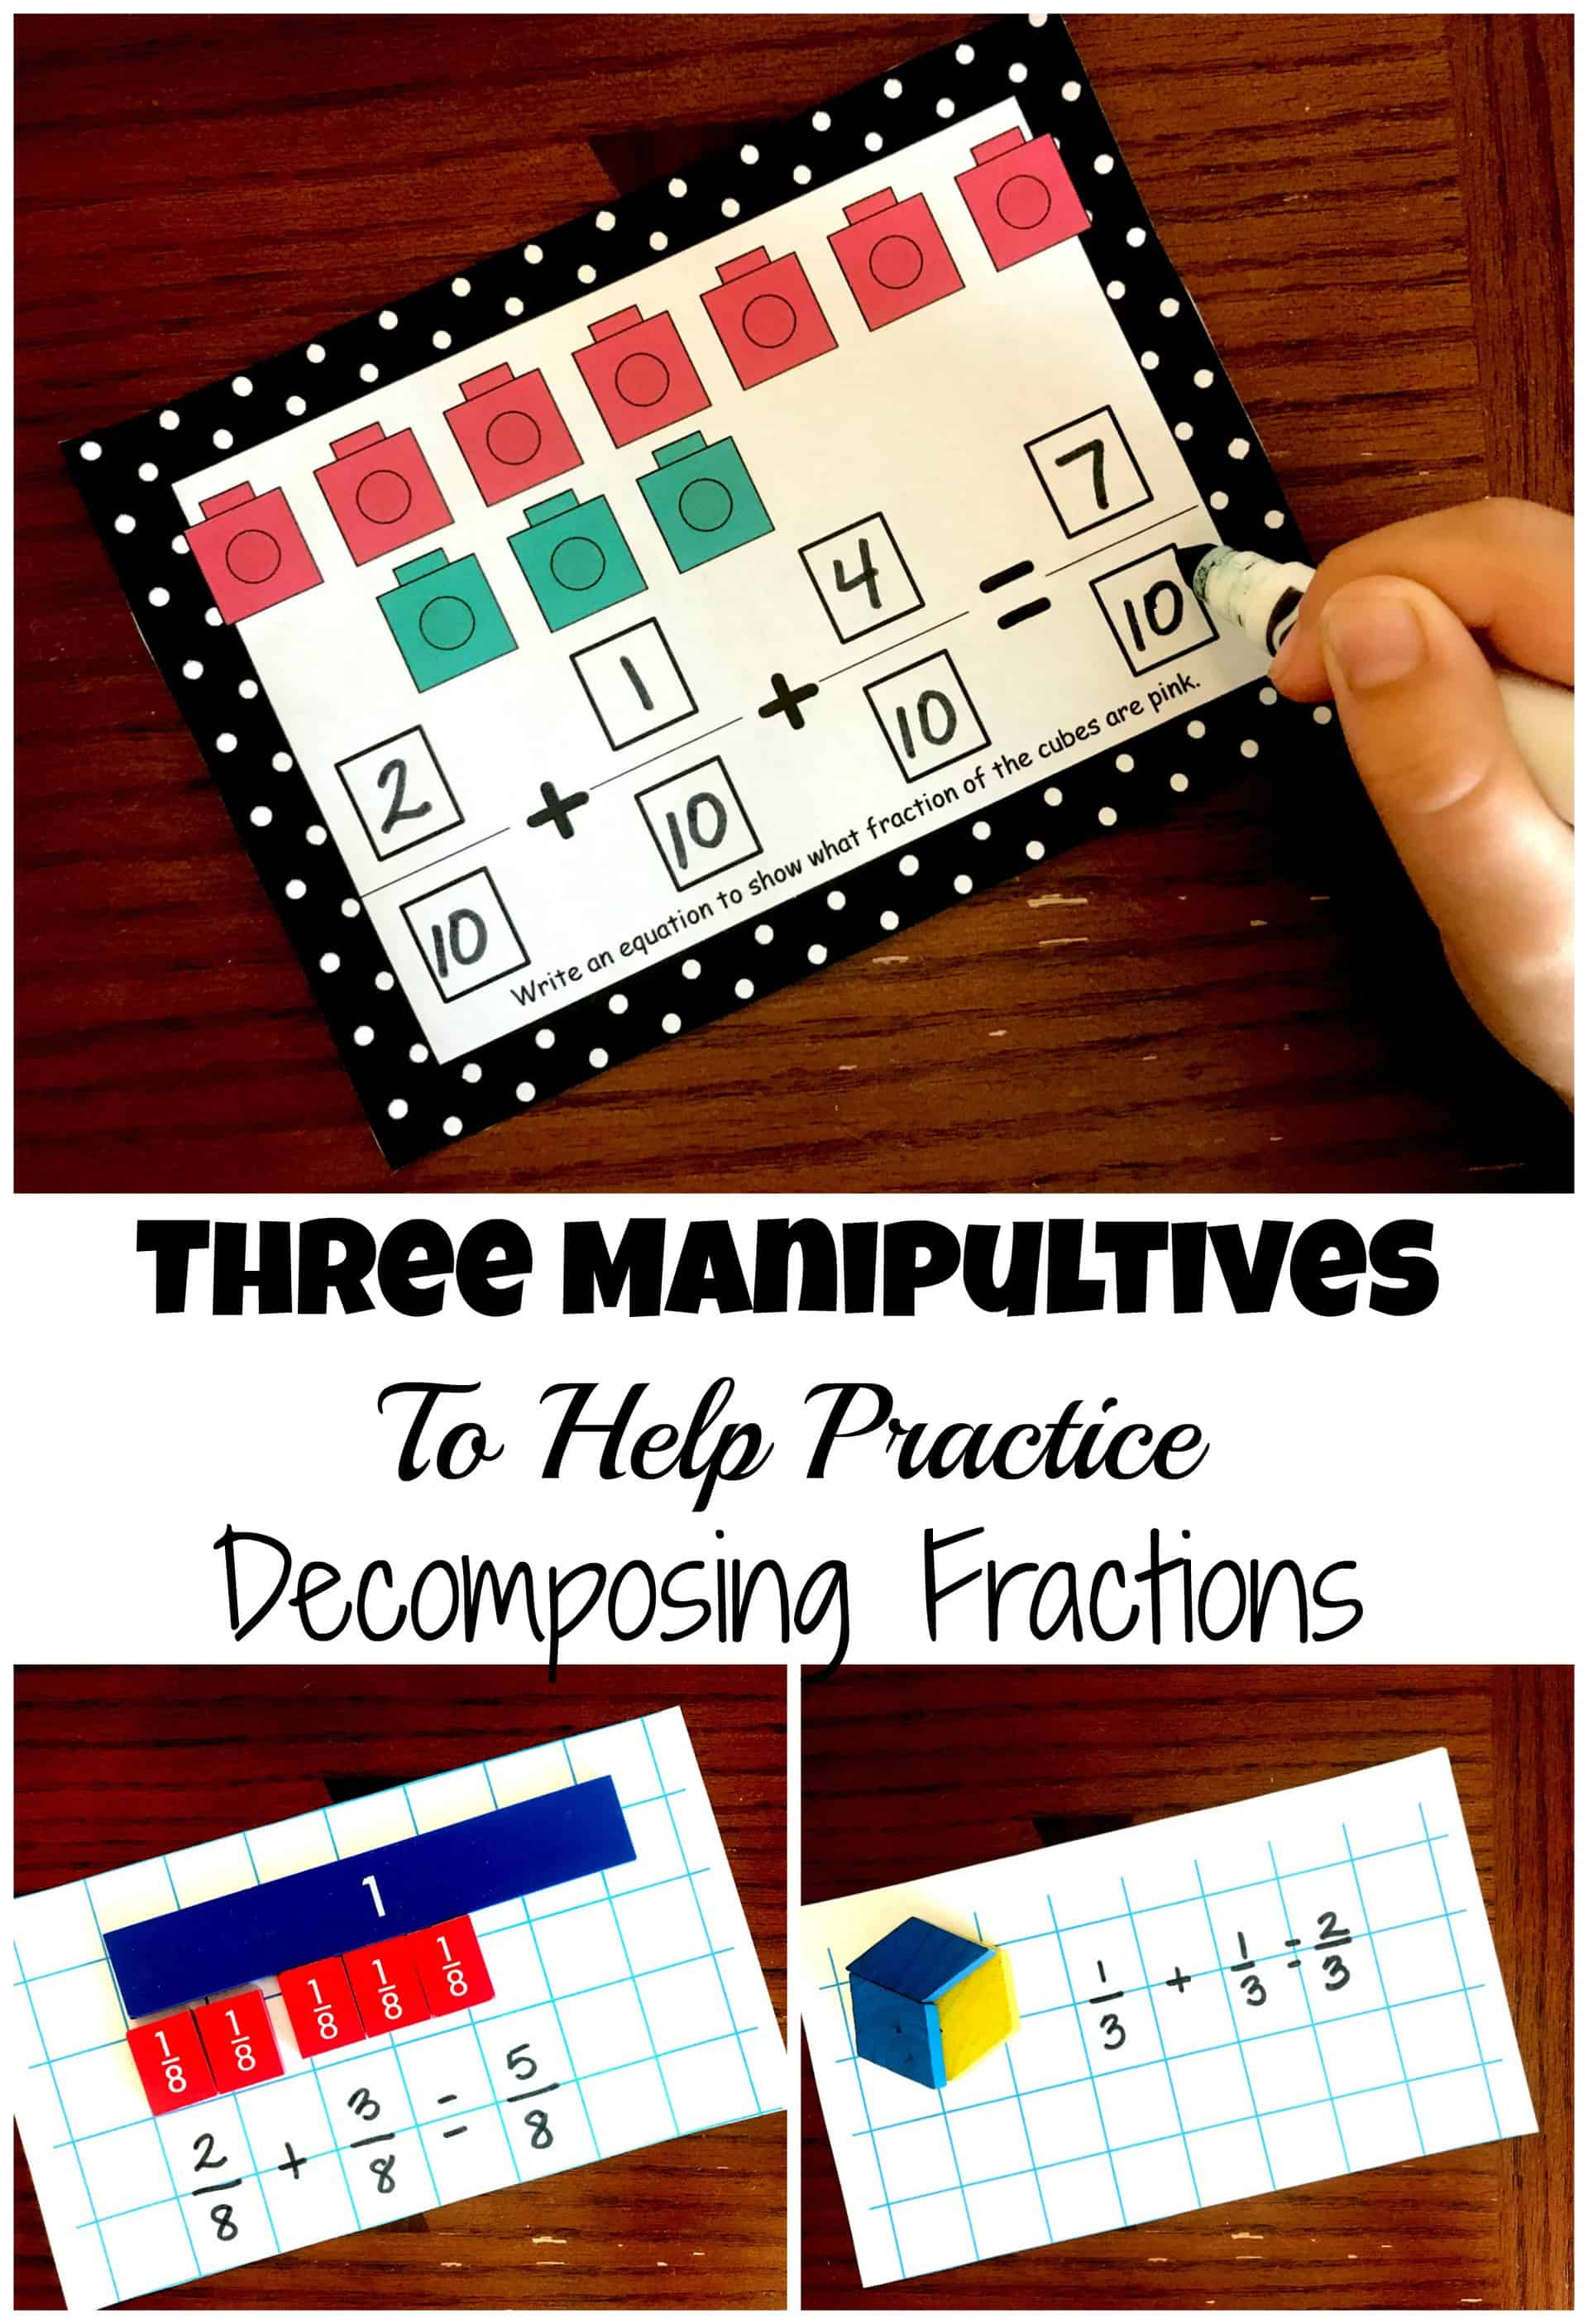 decomposing fractions